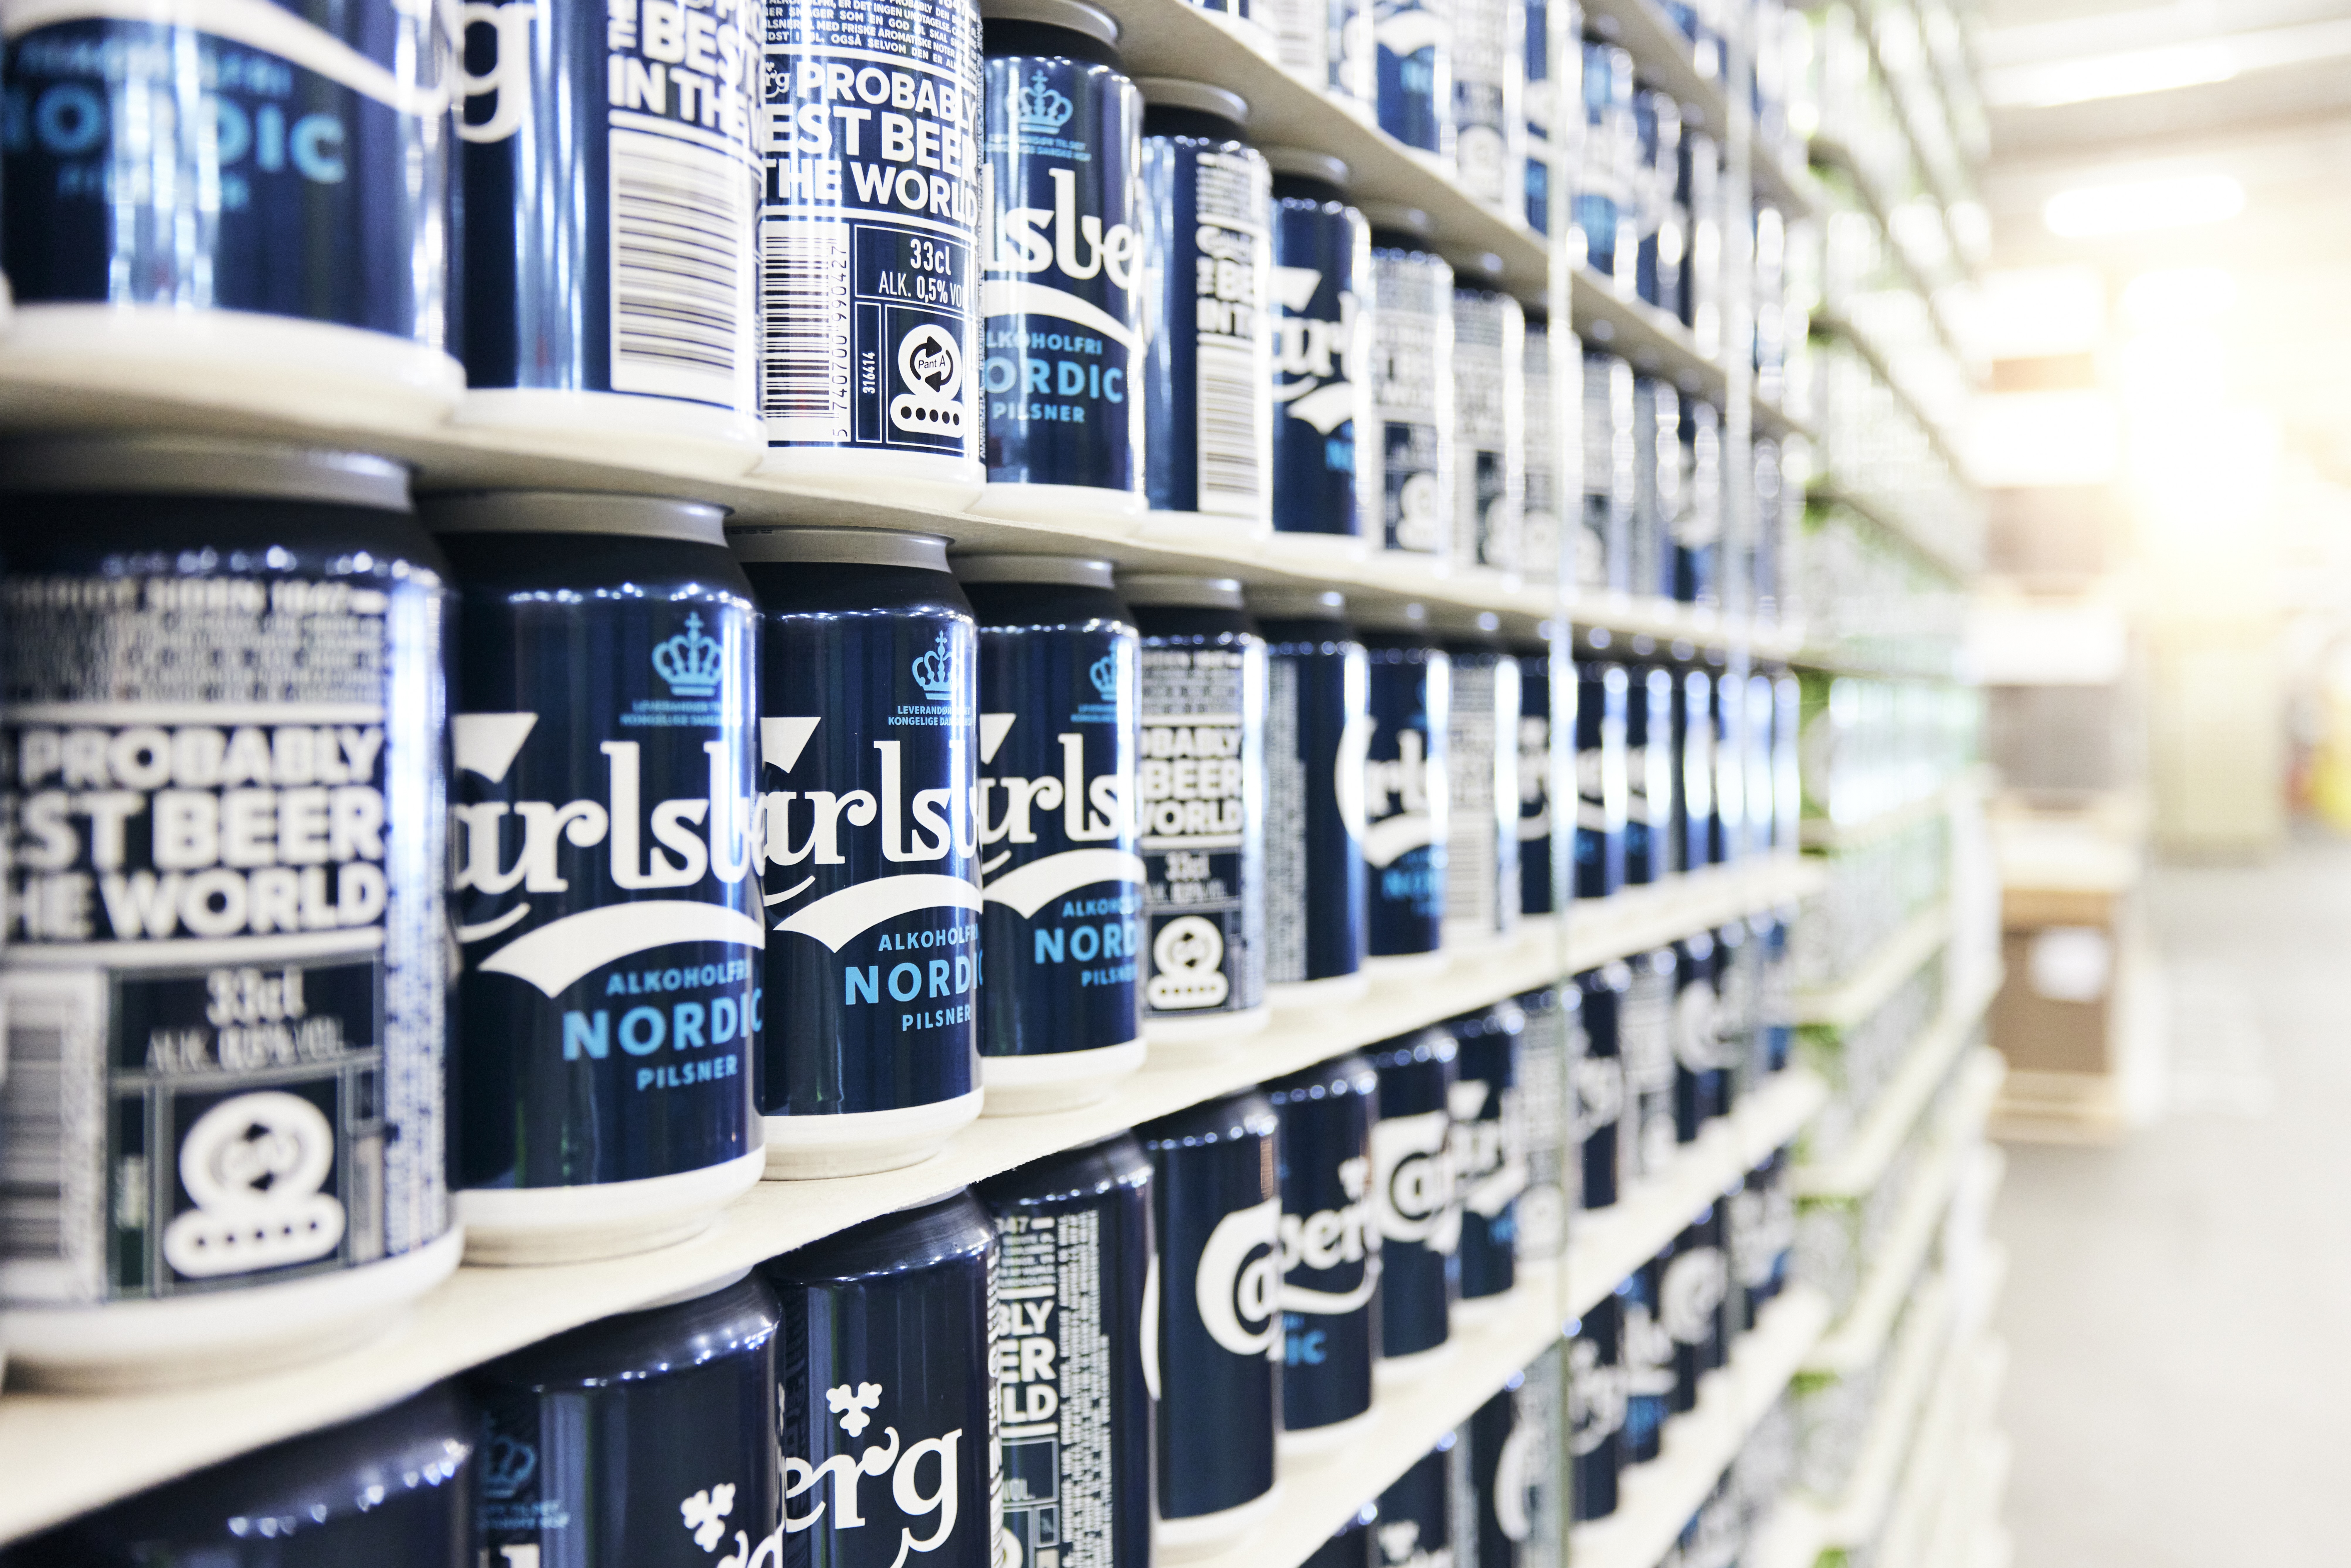 Cans of Carlsberg beer on a shelf 